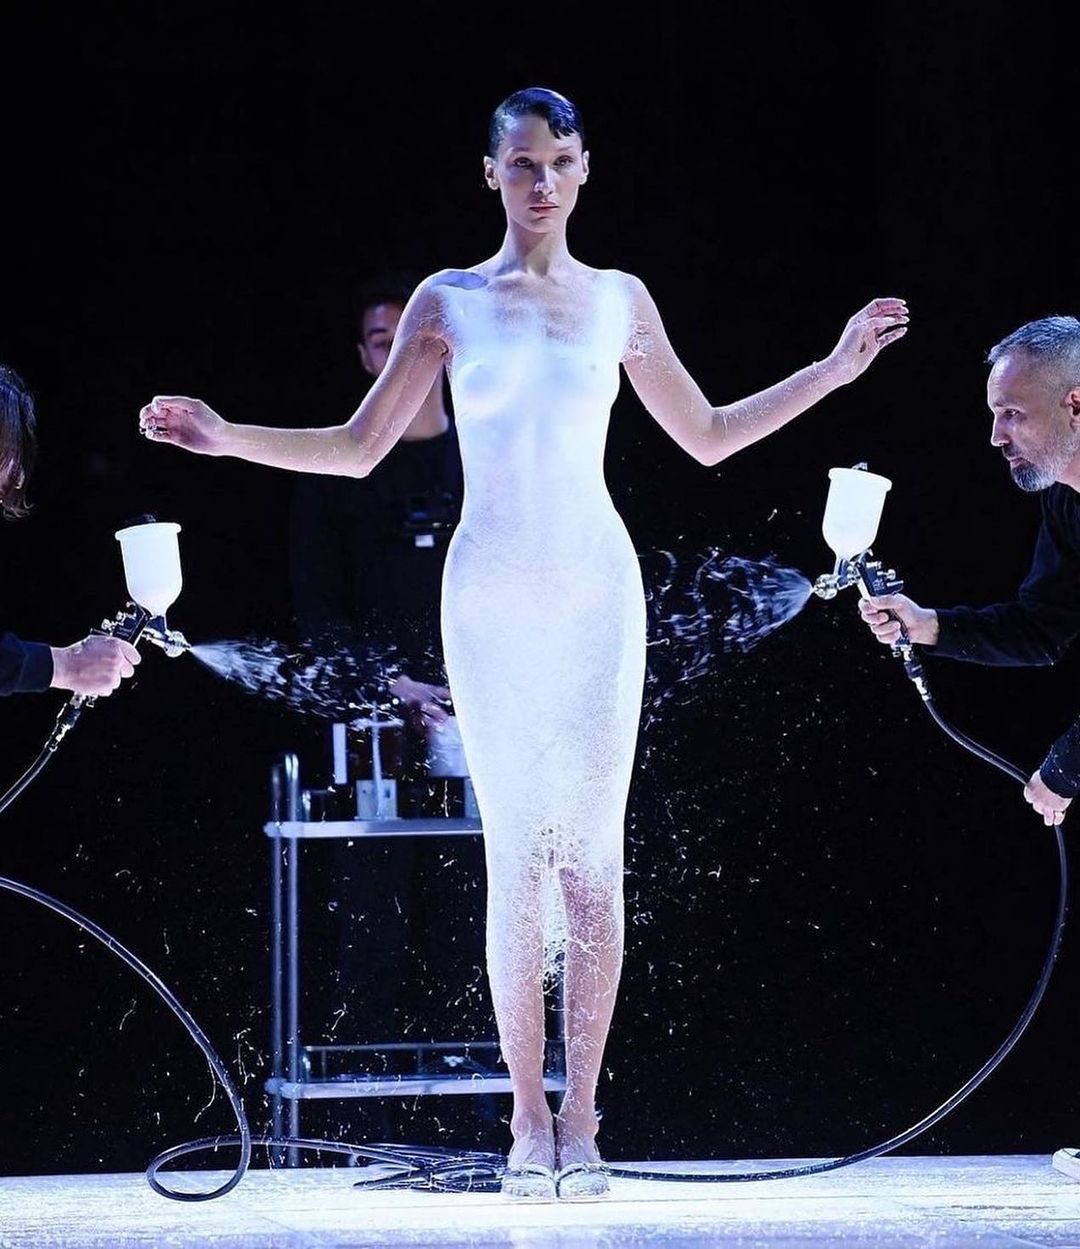 Spray-On Fabric Technology Featured in Paris Fashion Week - TOMORROW'S  WORLD TODAY®